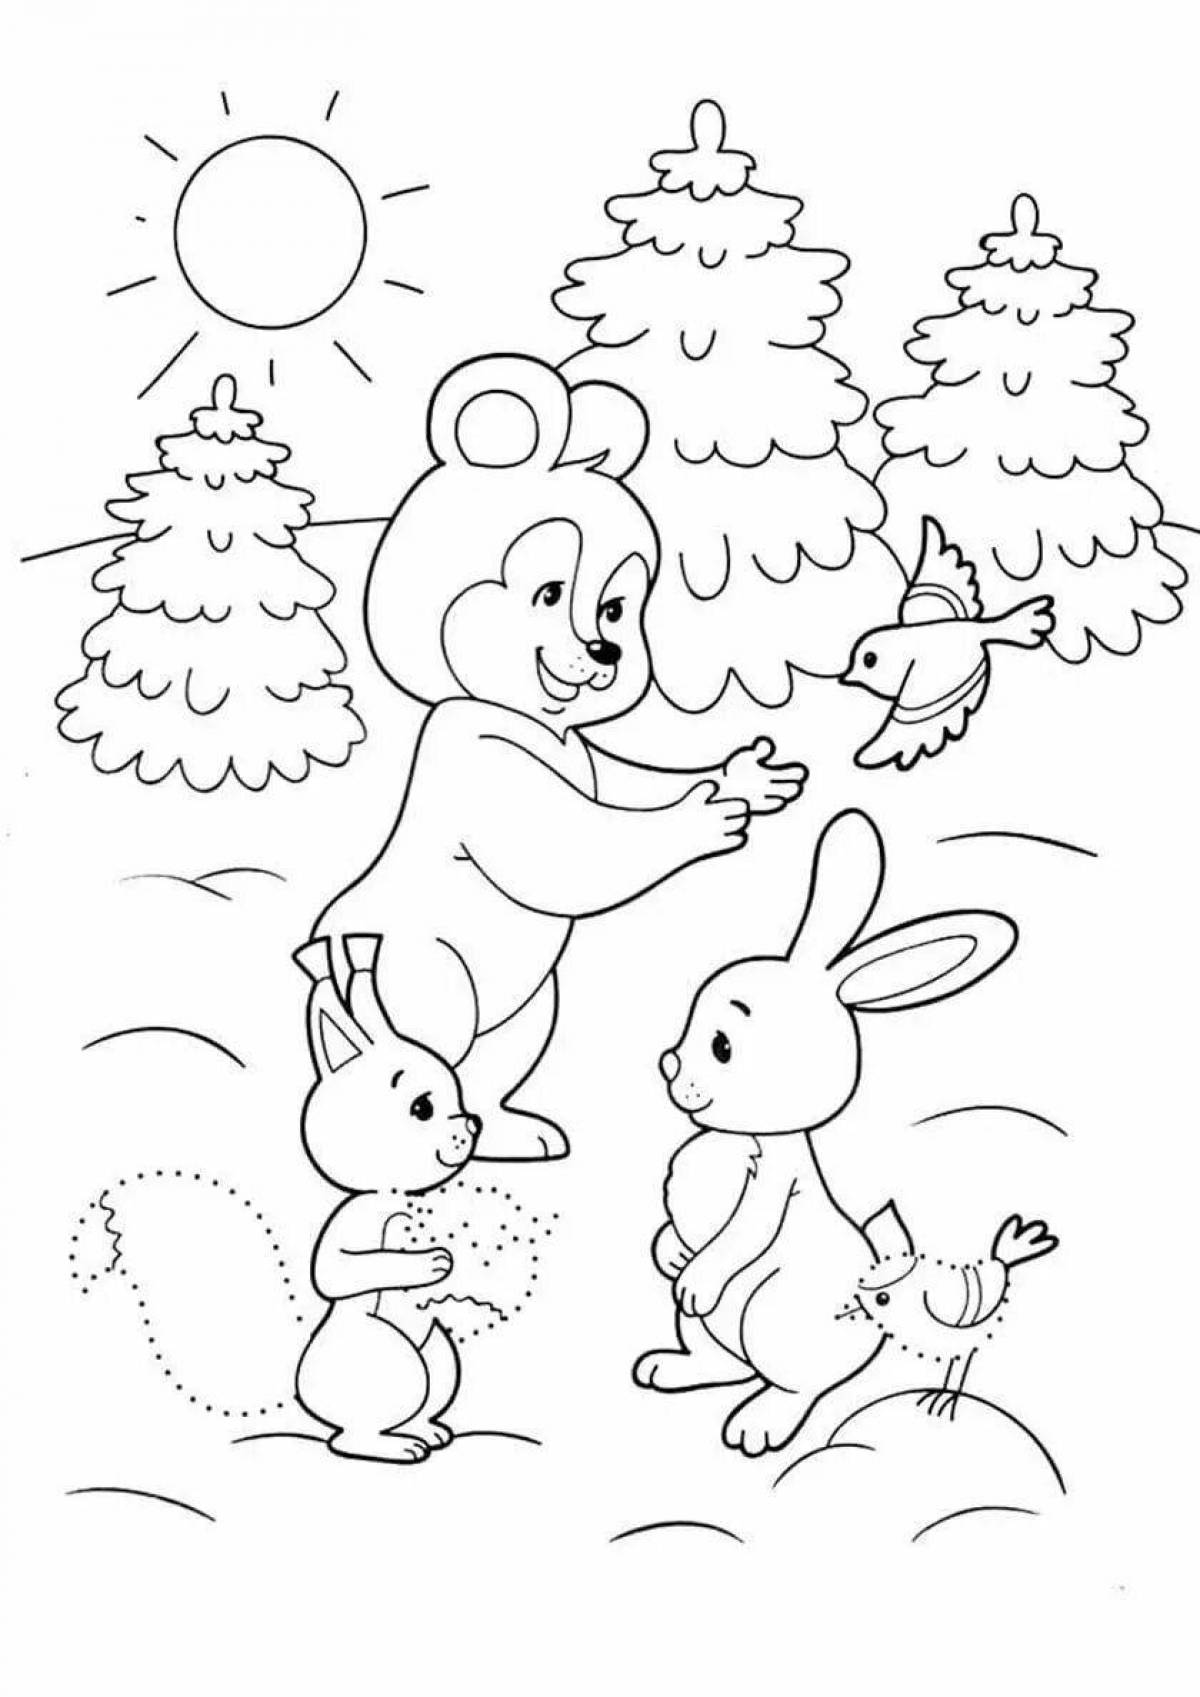 Wonderful animal coloring pages in winter